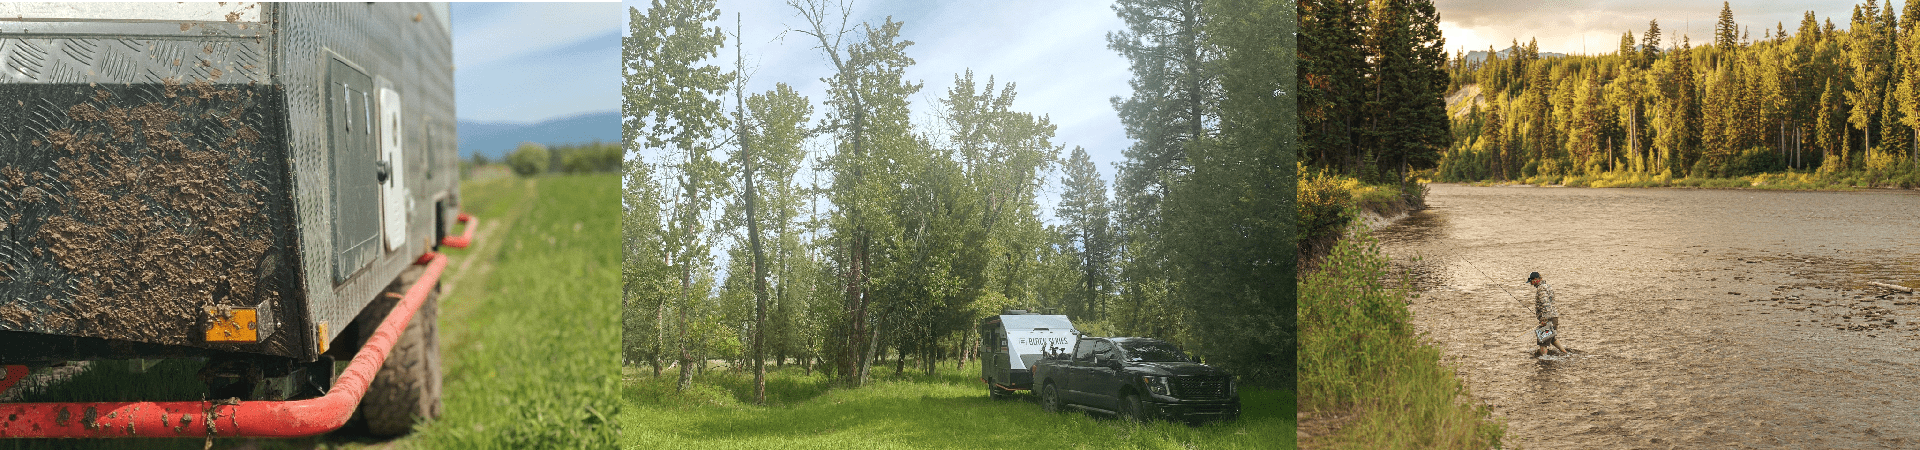 off-road trailer camping in Montana